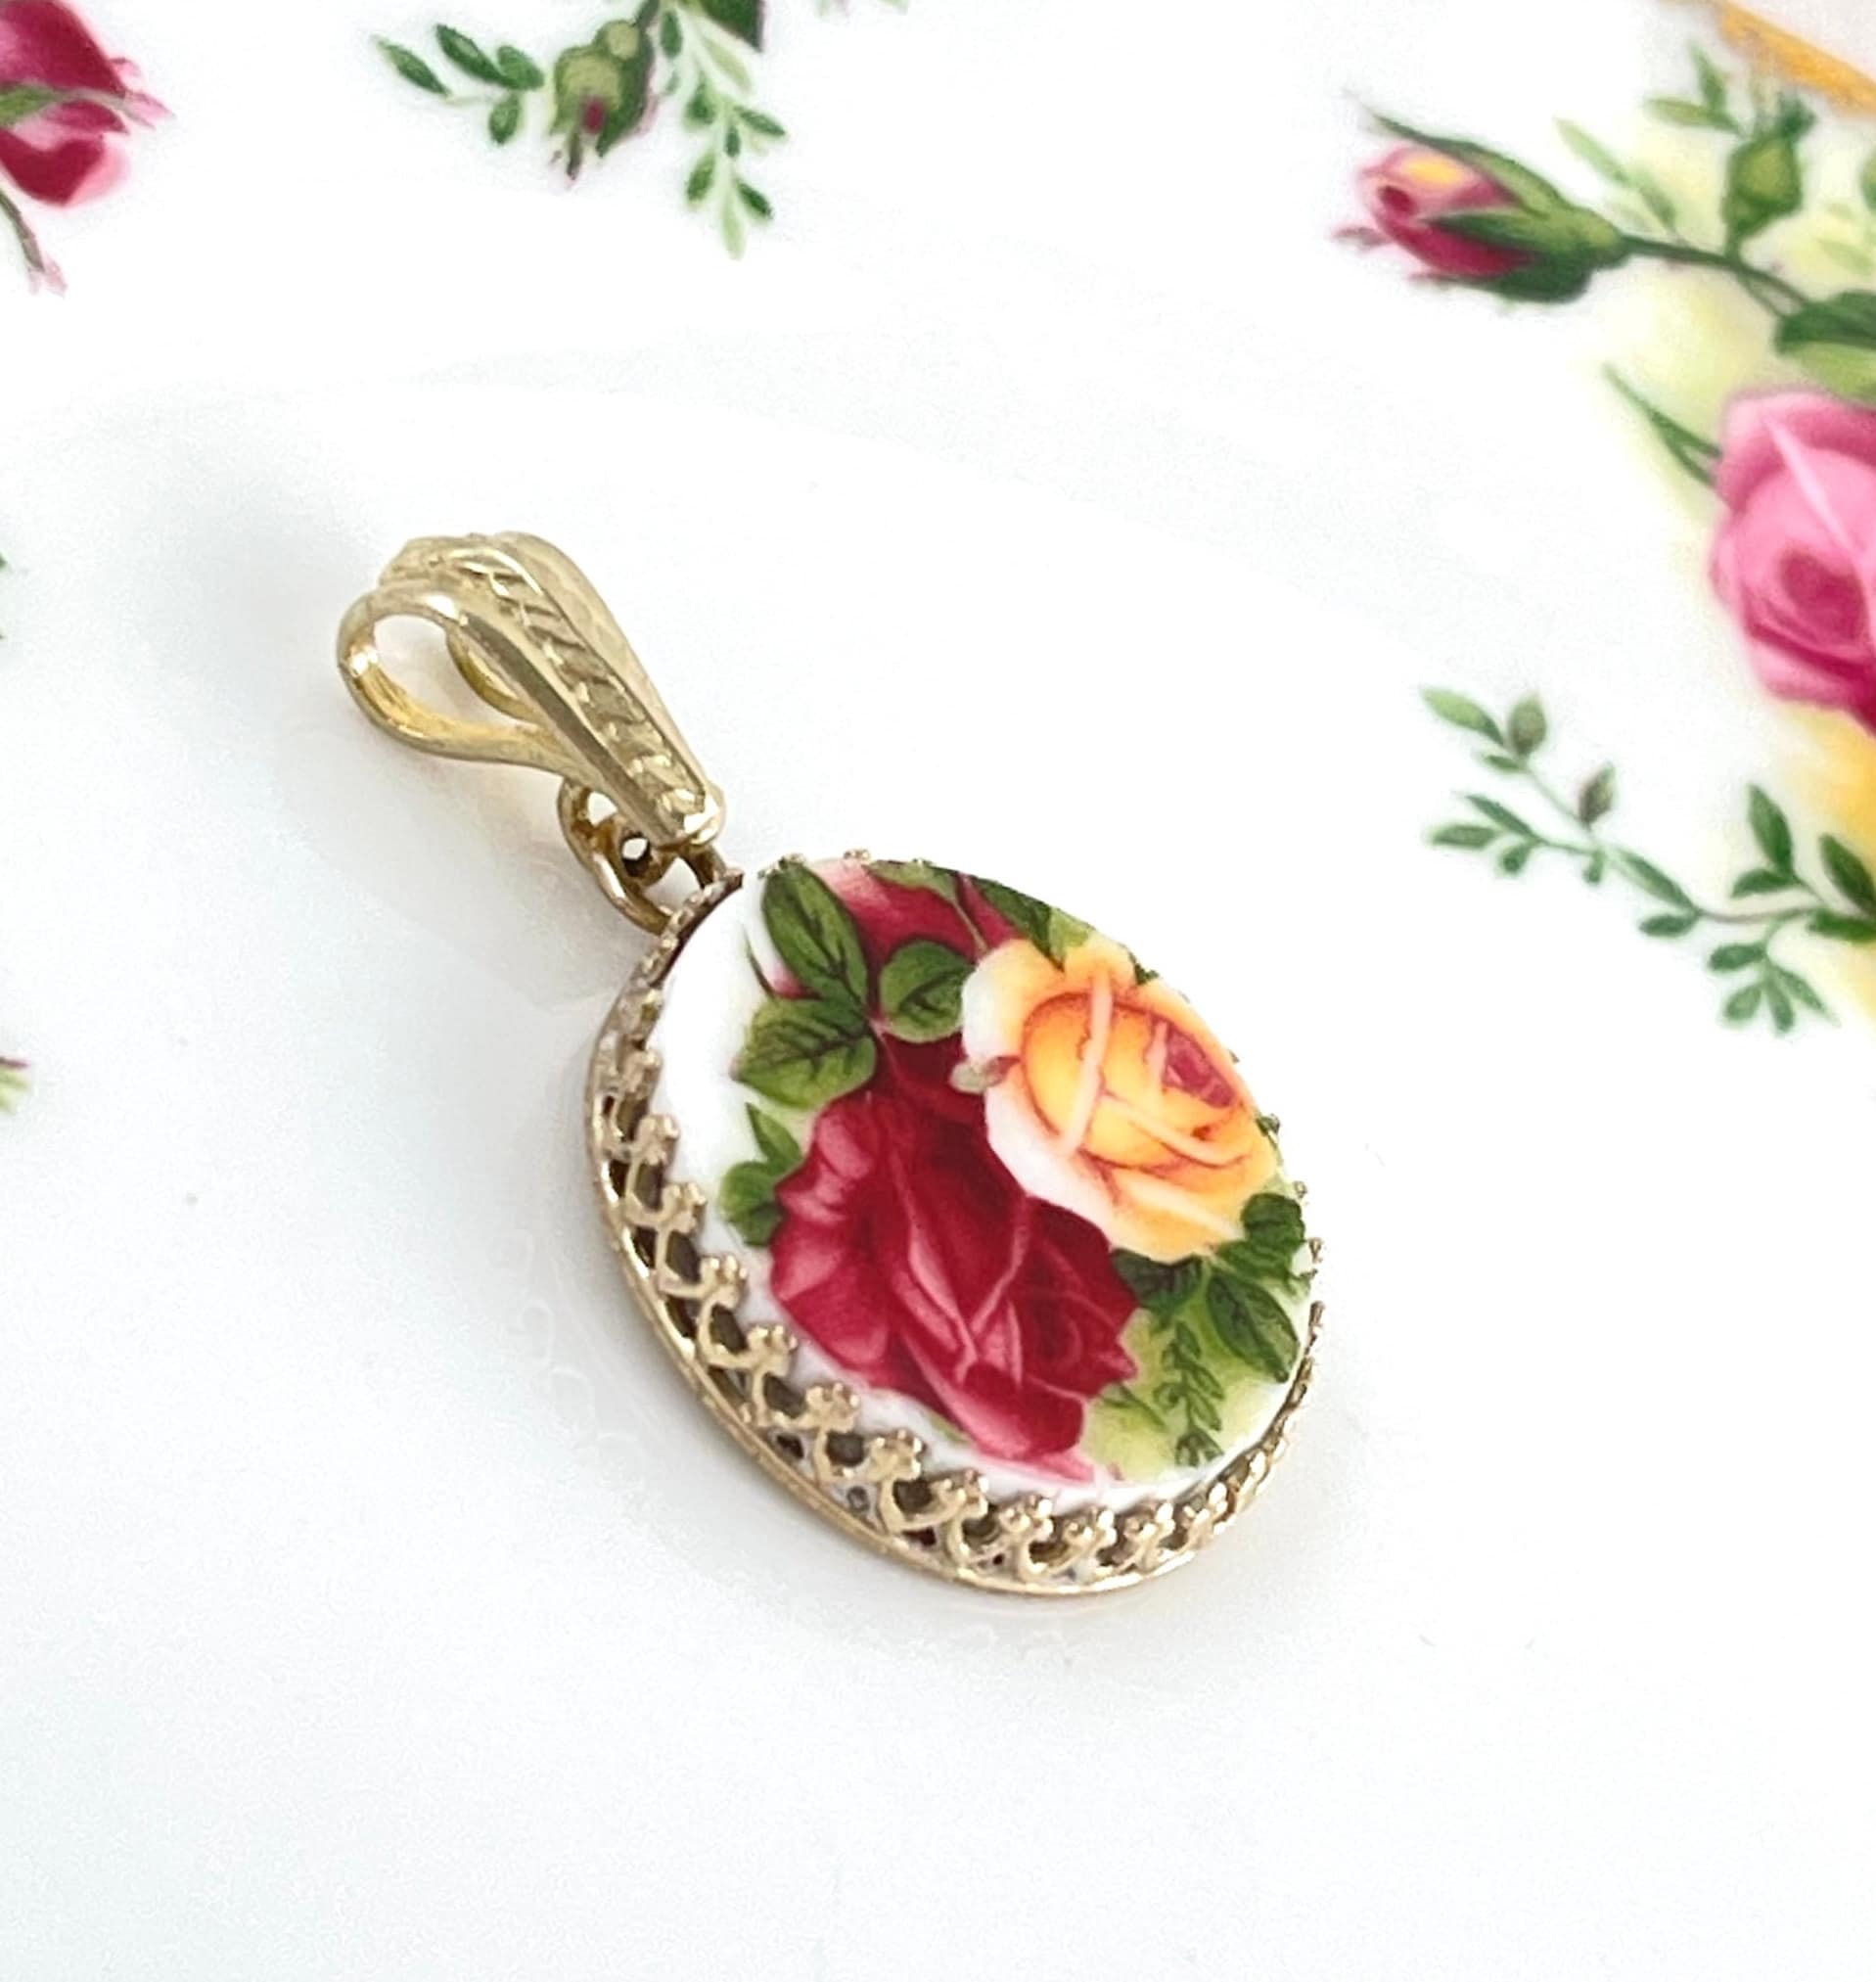 Royal Albert Old Country Roses Gold Broken China Jewelry, 50th Anniversary Gift for Wife, Golden Wedding Anniversary, 14k Gold Pendant